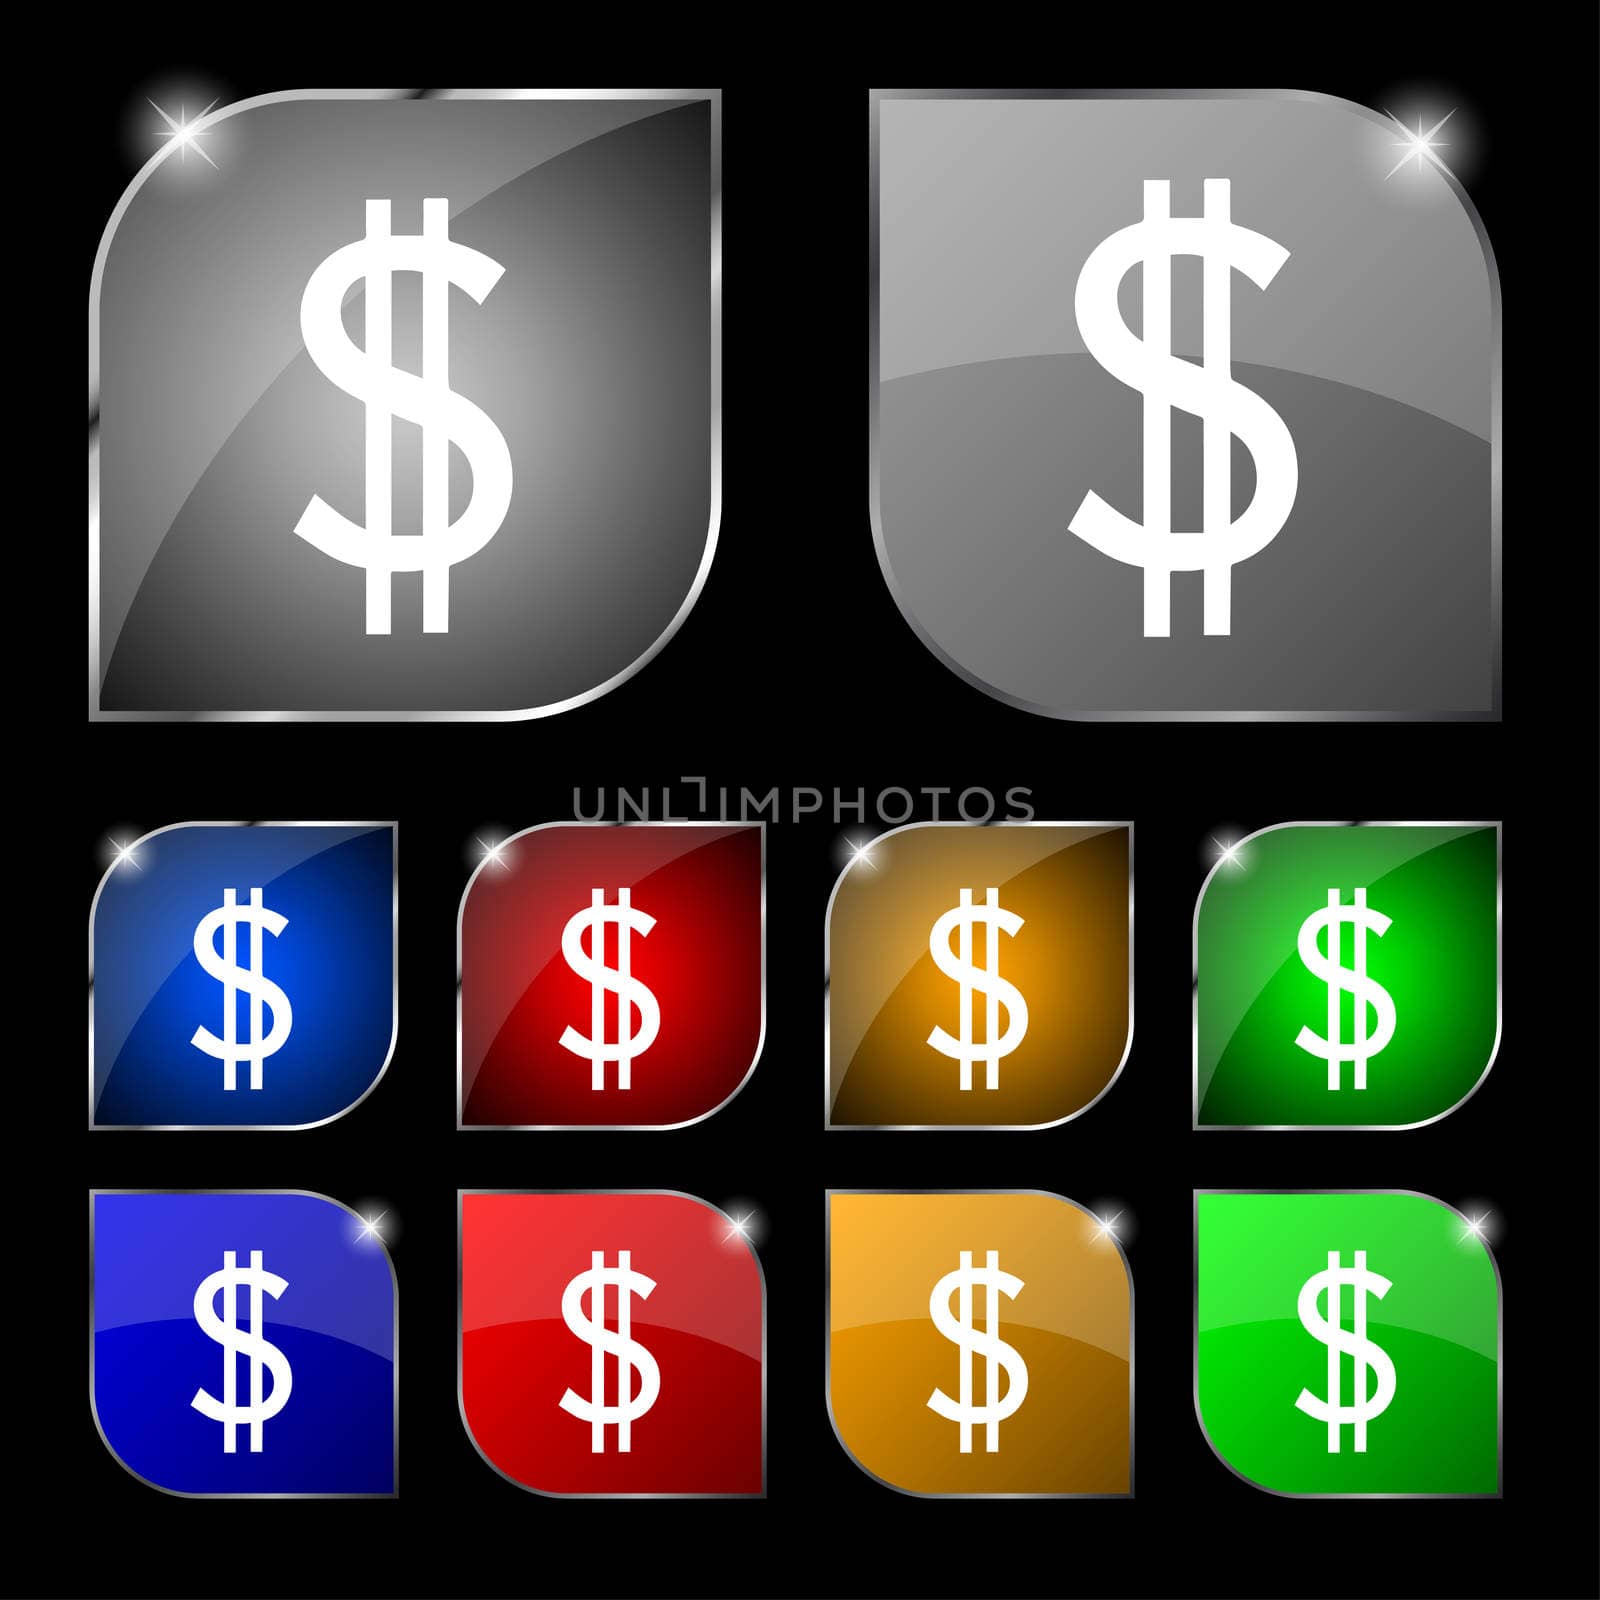 Dollars sign icon. USD currency symbol. Money label. Set of colored buttons. illustration